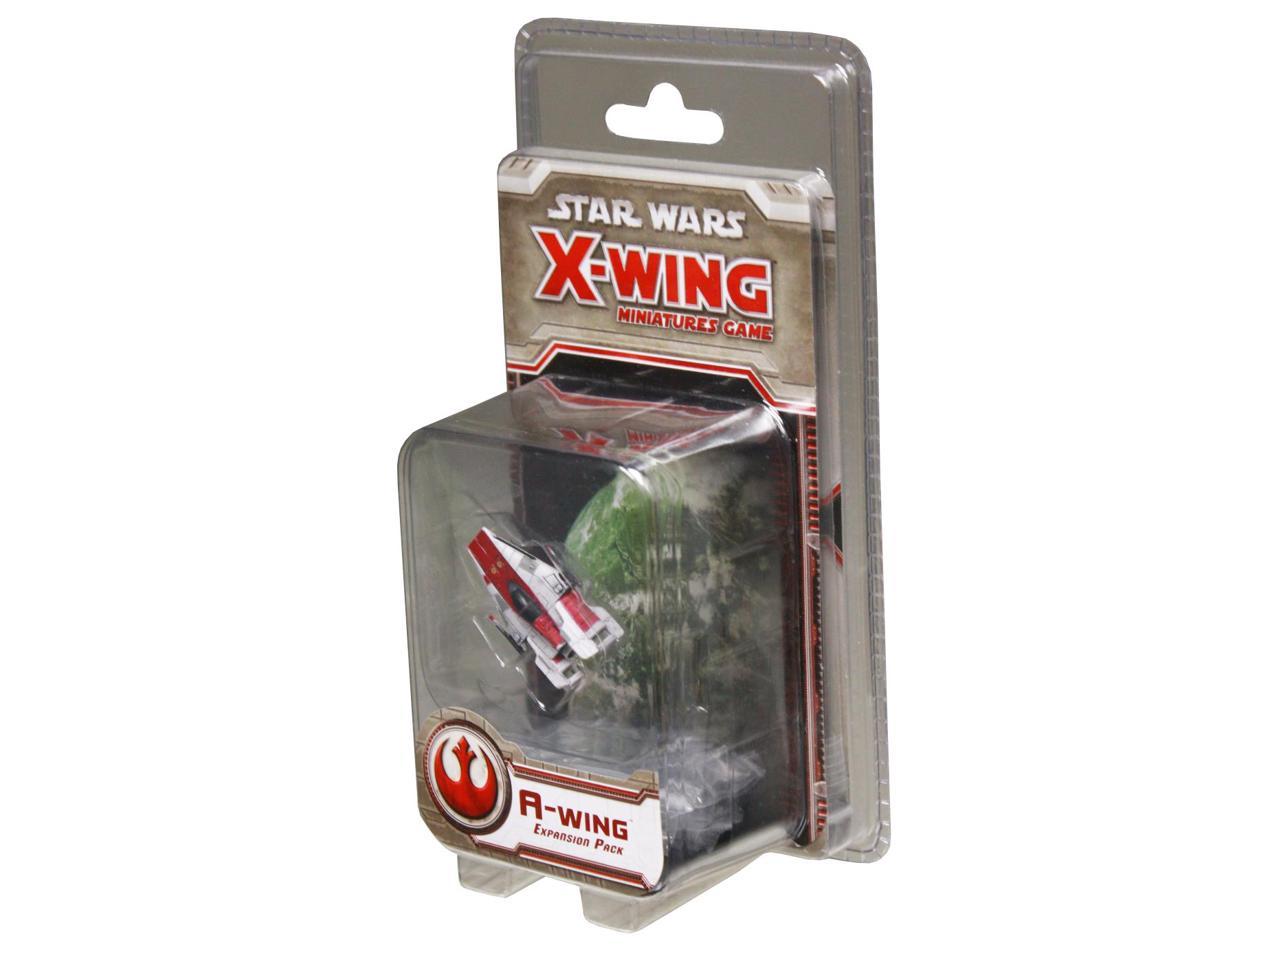 Scum and Villainy Alliance Conversion Kit Star Wars X-Wing Miniatures Game SWZ08 